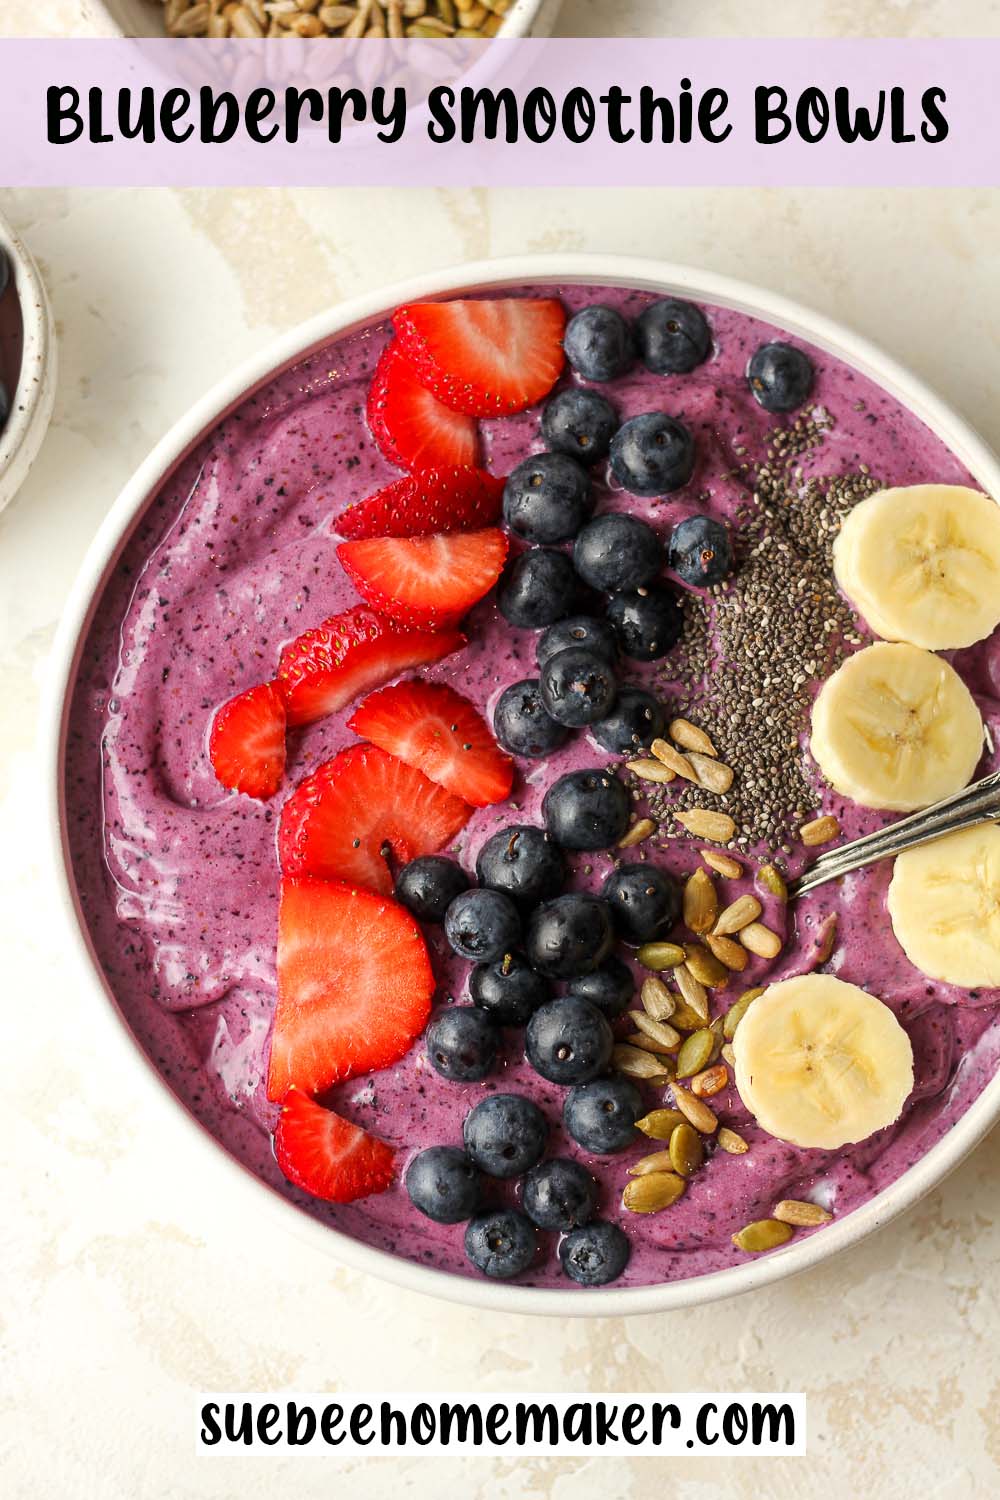 A blueberry smoothie bowl with sliced fruit and nuts.